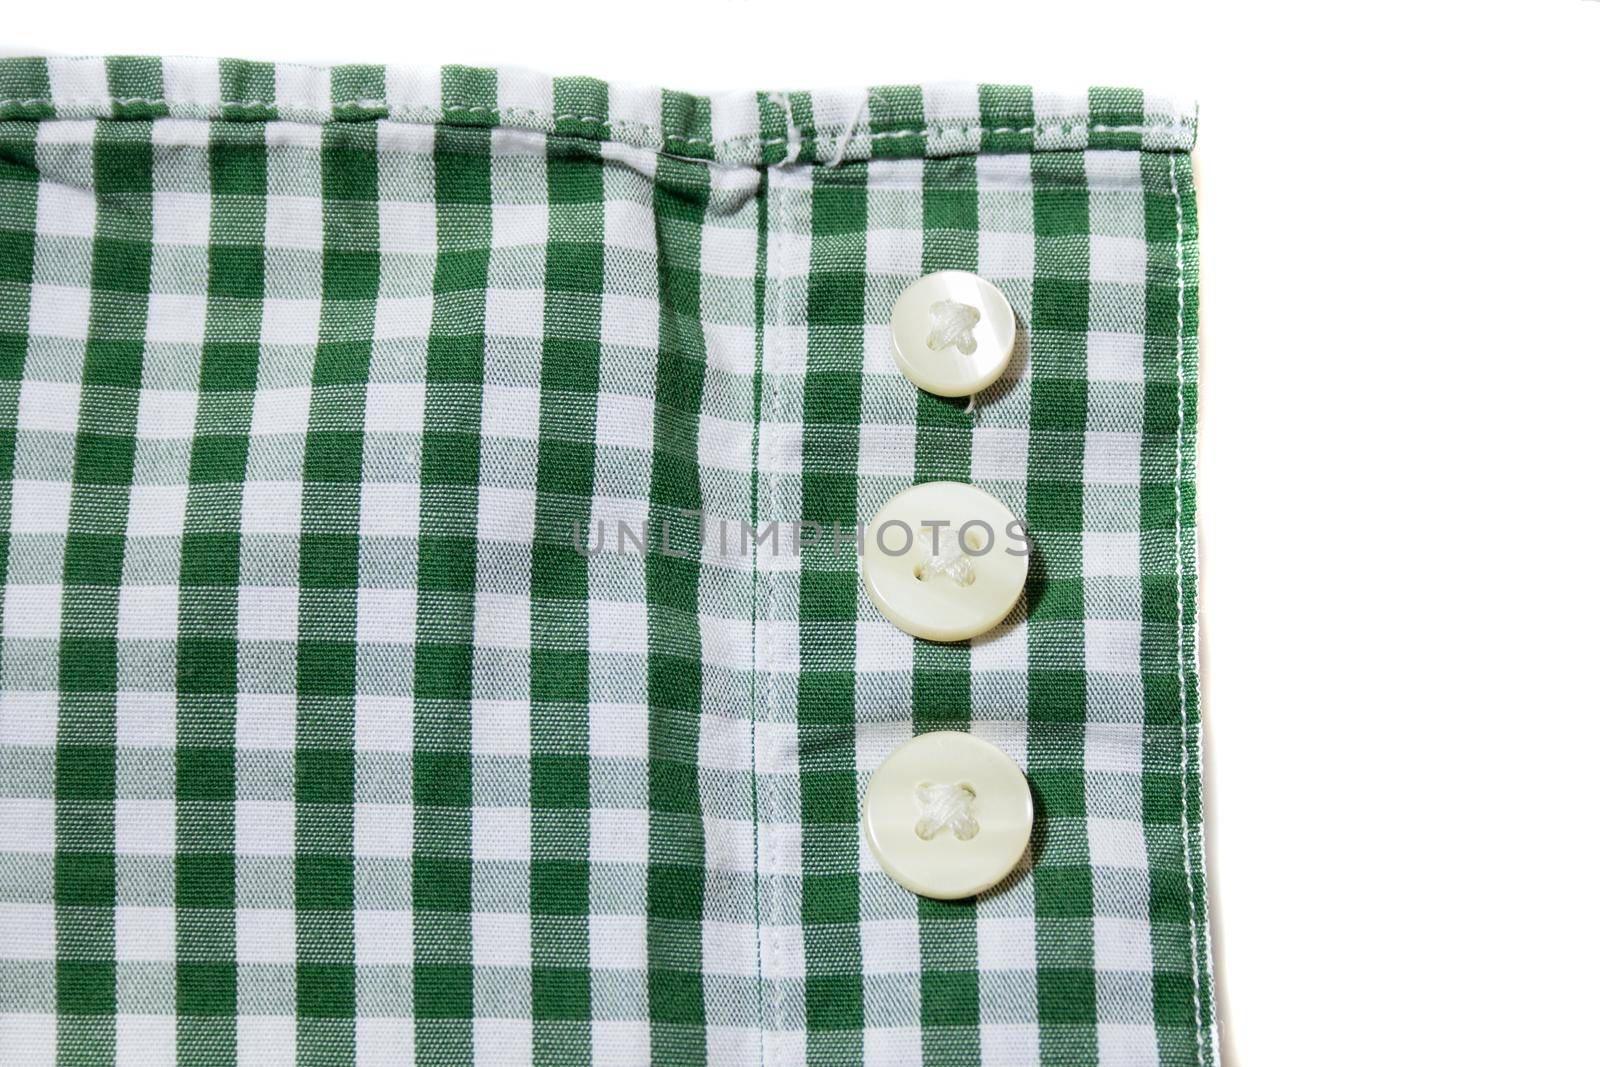 Three white spare buttons on green men's shirt